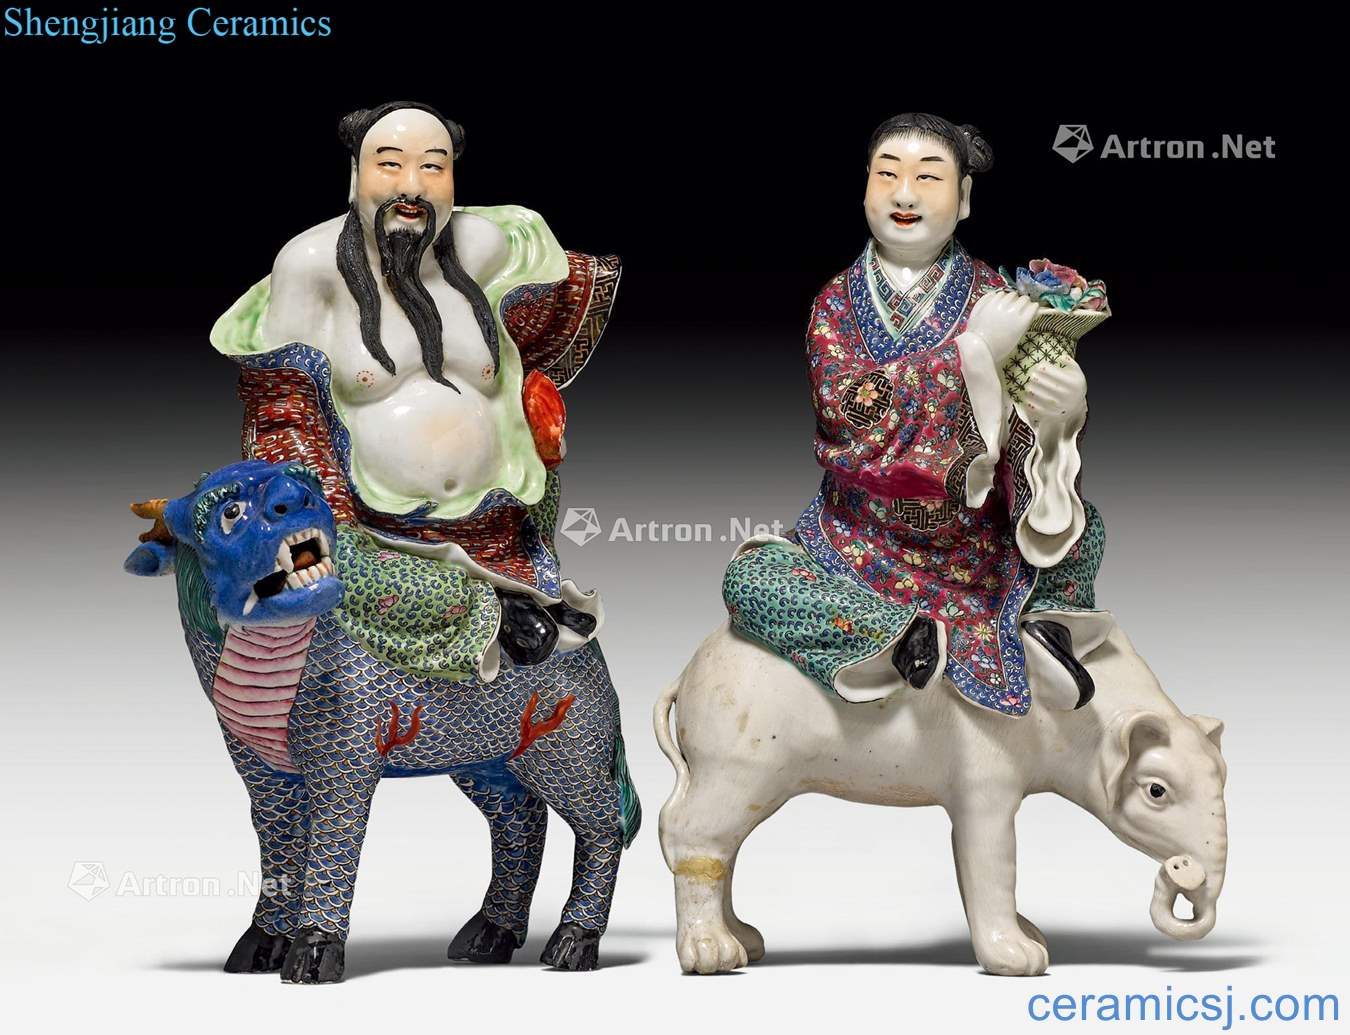 Newest THE Qing dynasty TWO FAMILLE ROSE FIGURES OF THE DAOIST IMMOR - TALS LAN CAIHE AND ZHONGLI QUAN, RIDING AN ELEPHANT AND A QILIN.